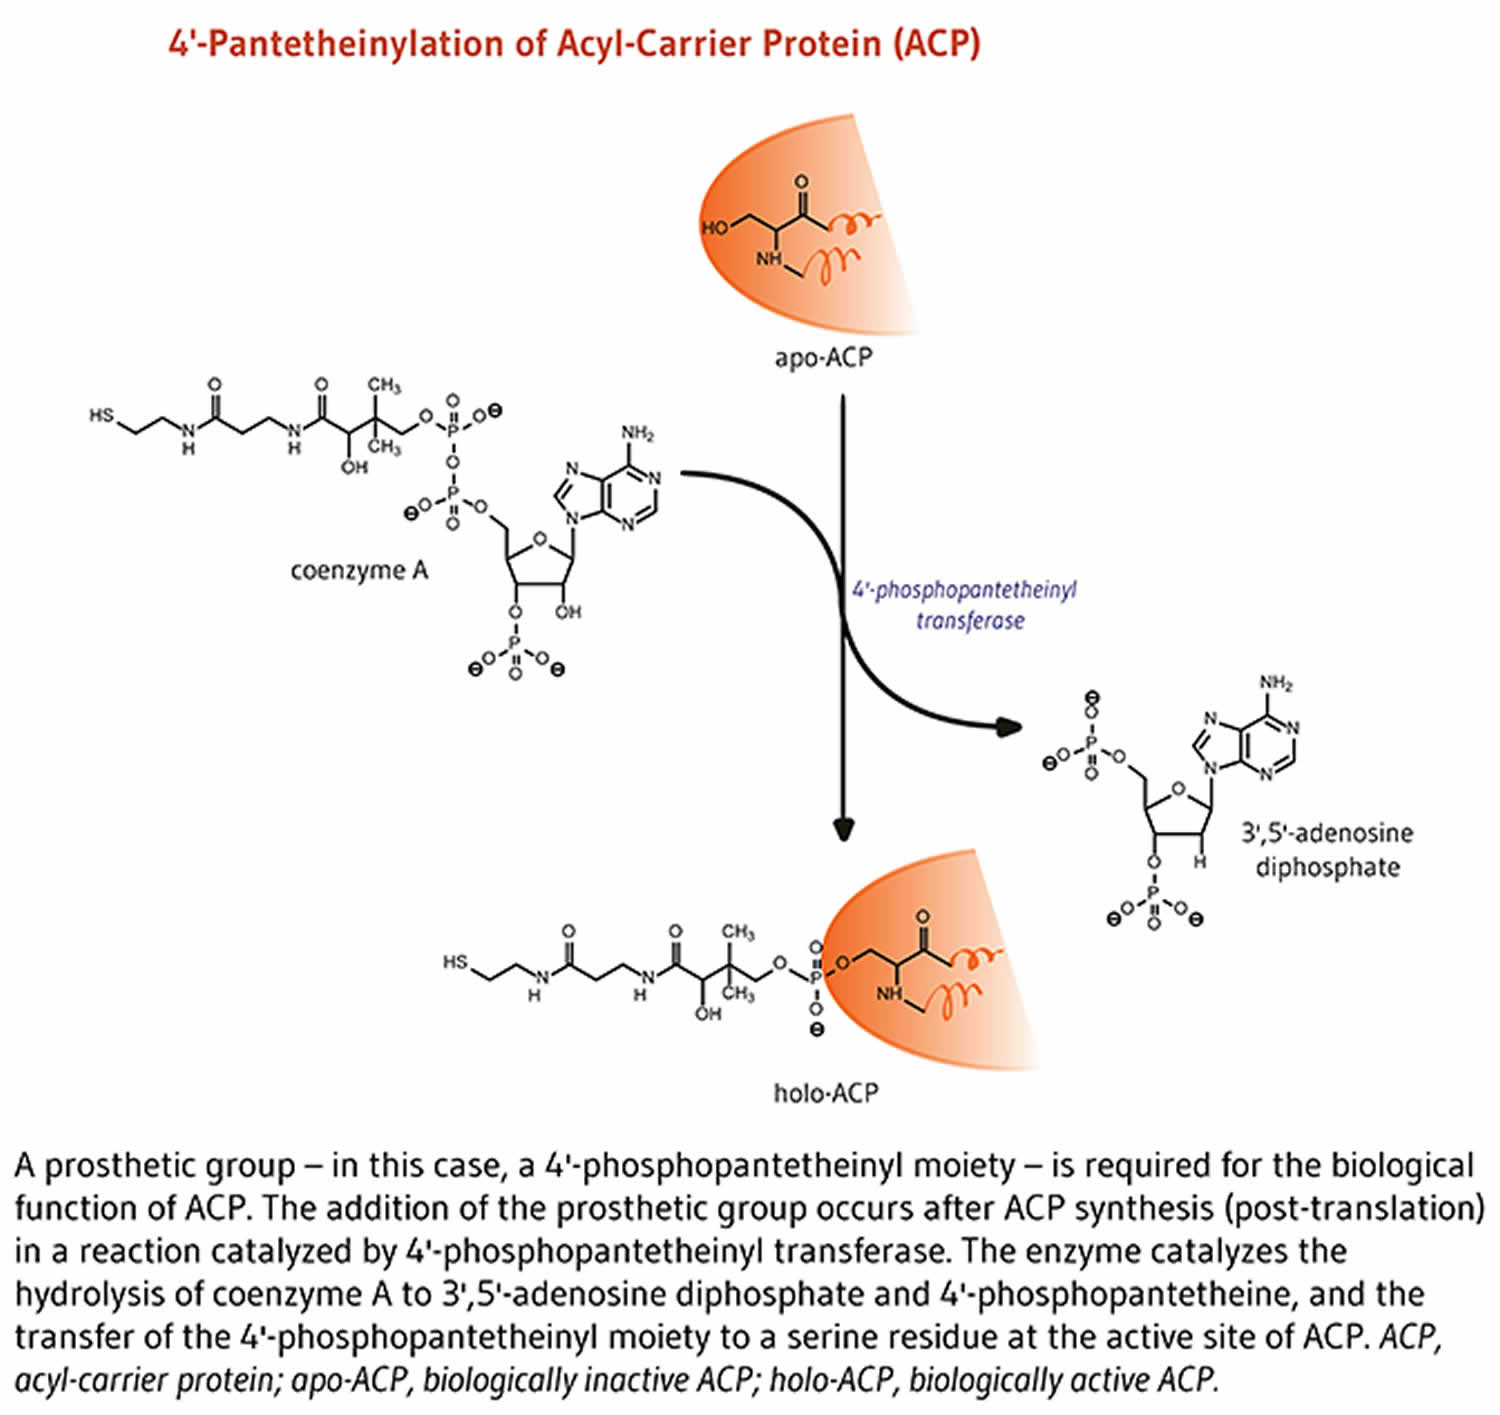 Acyl-carrier protein function